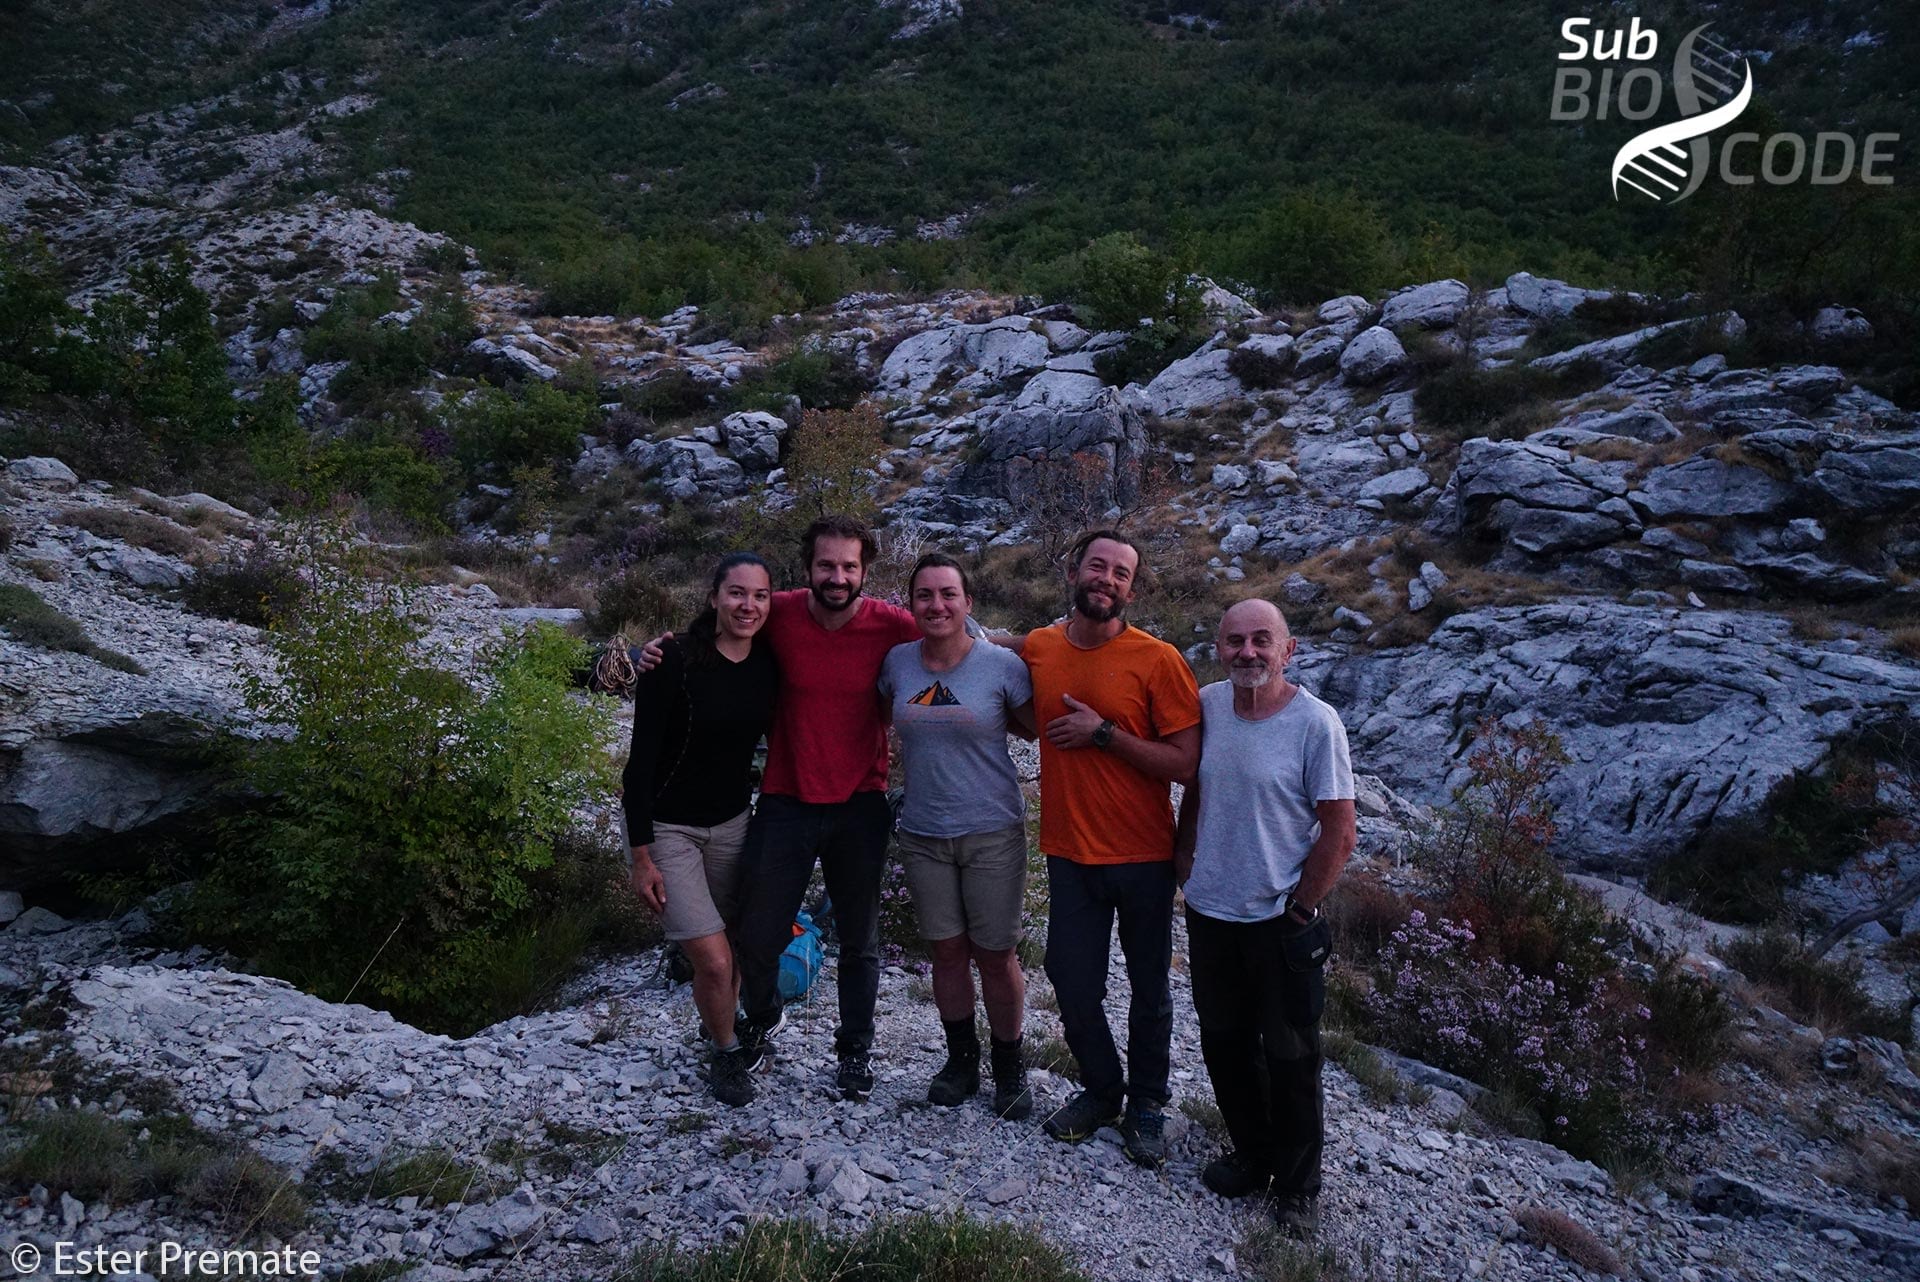 Group photo after a long day of caving (Ester, Hans, Behare, Teo, Branko).